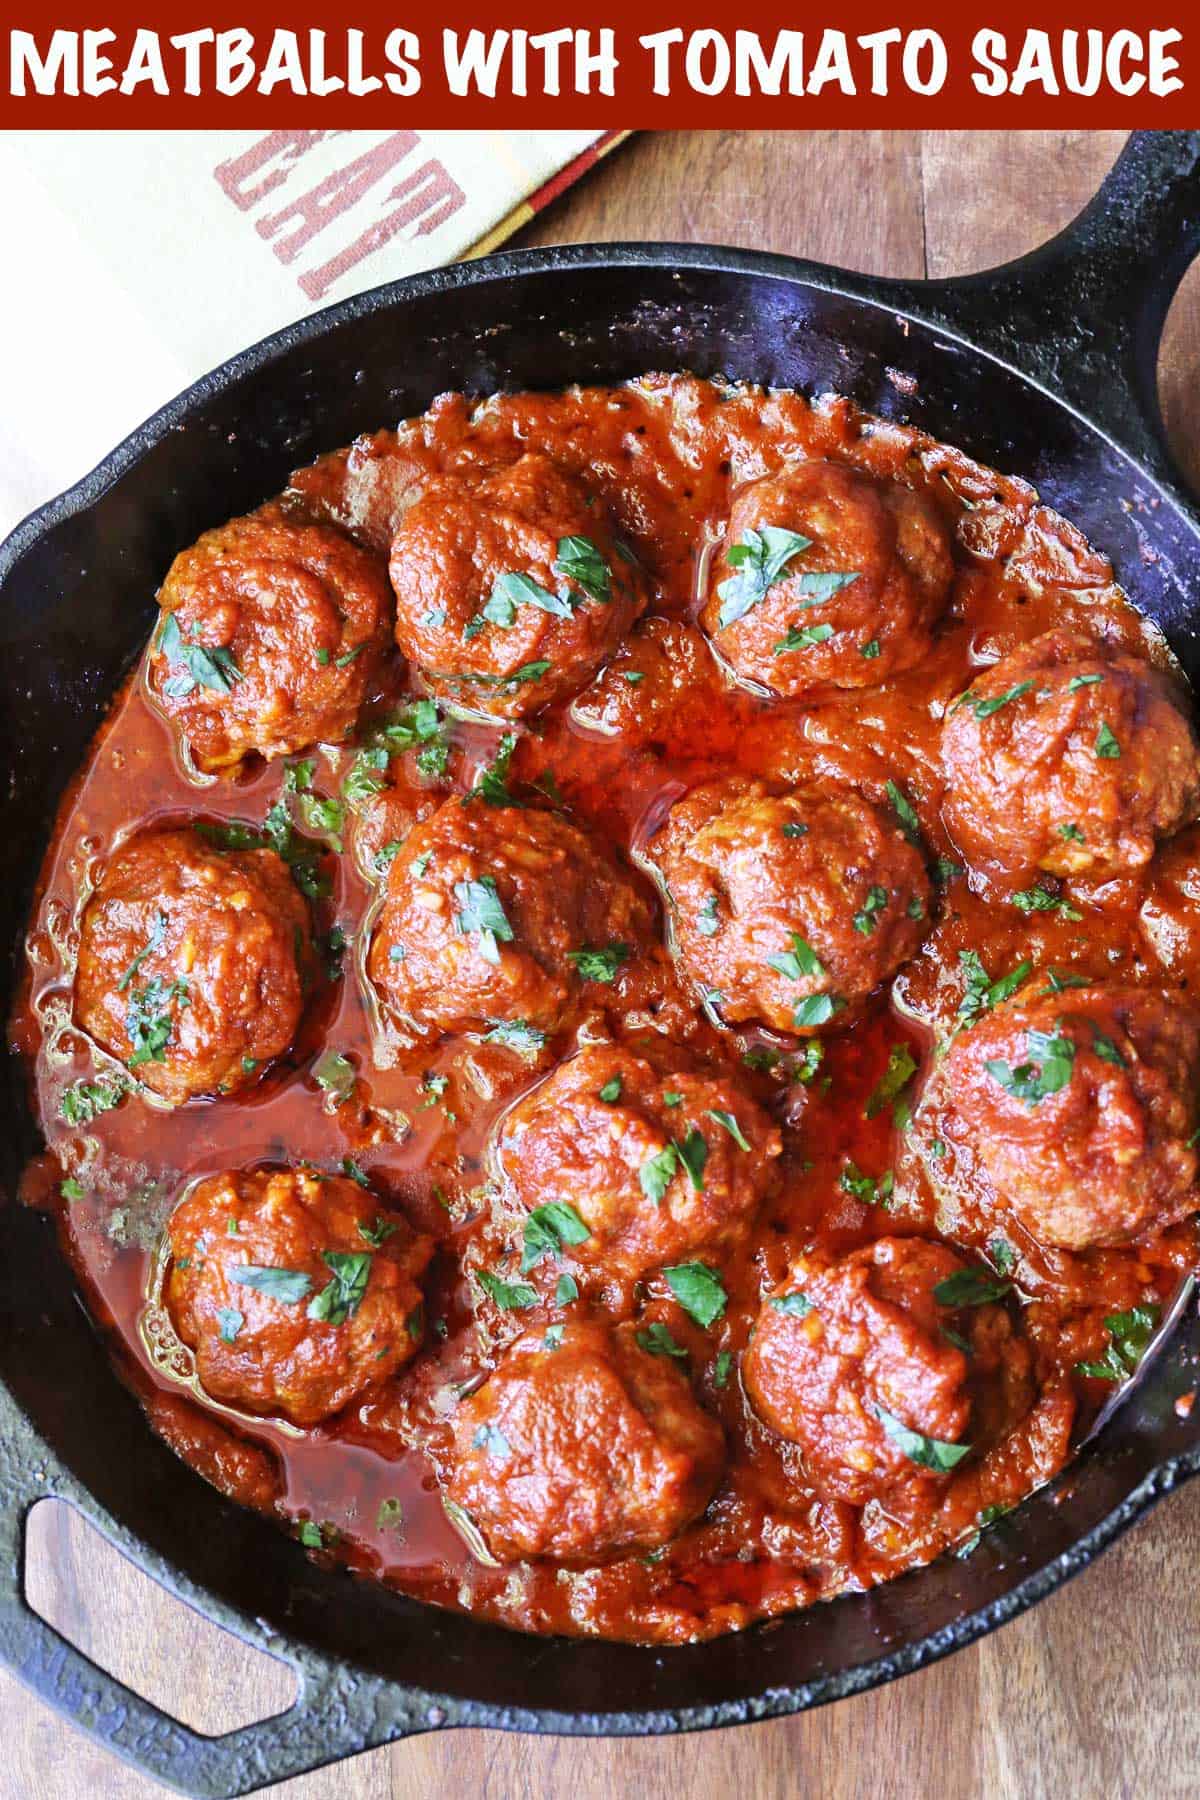 Meatballs in tomato sauce served in a cast-iron skillet with a napkin.  